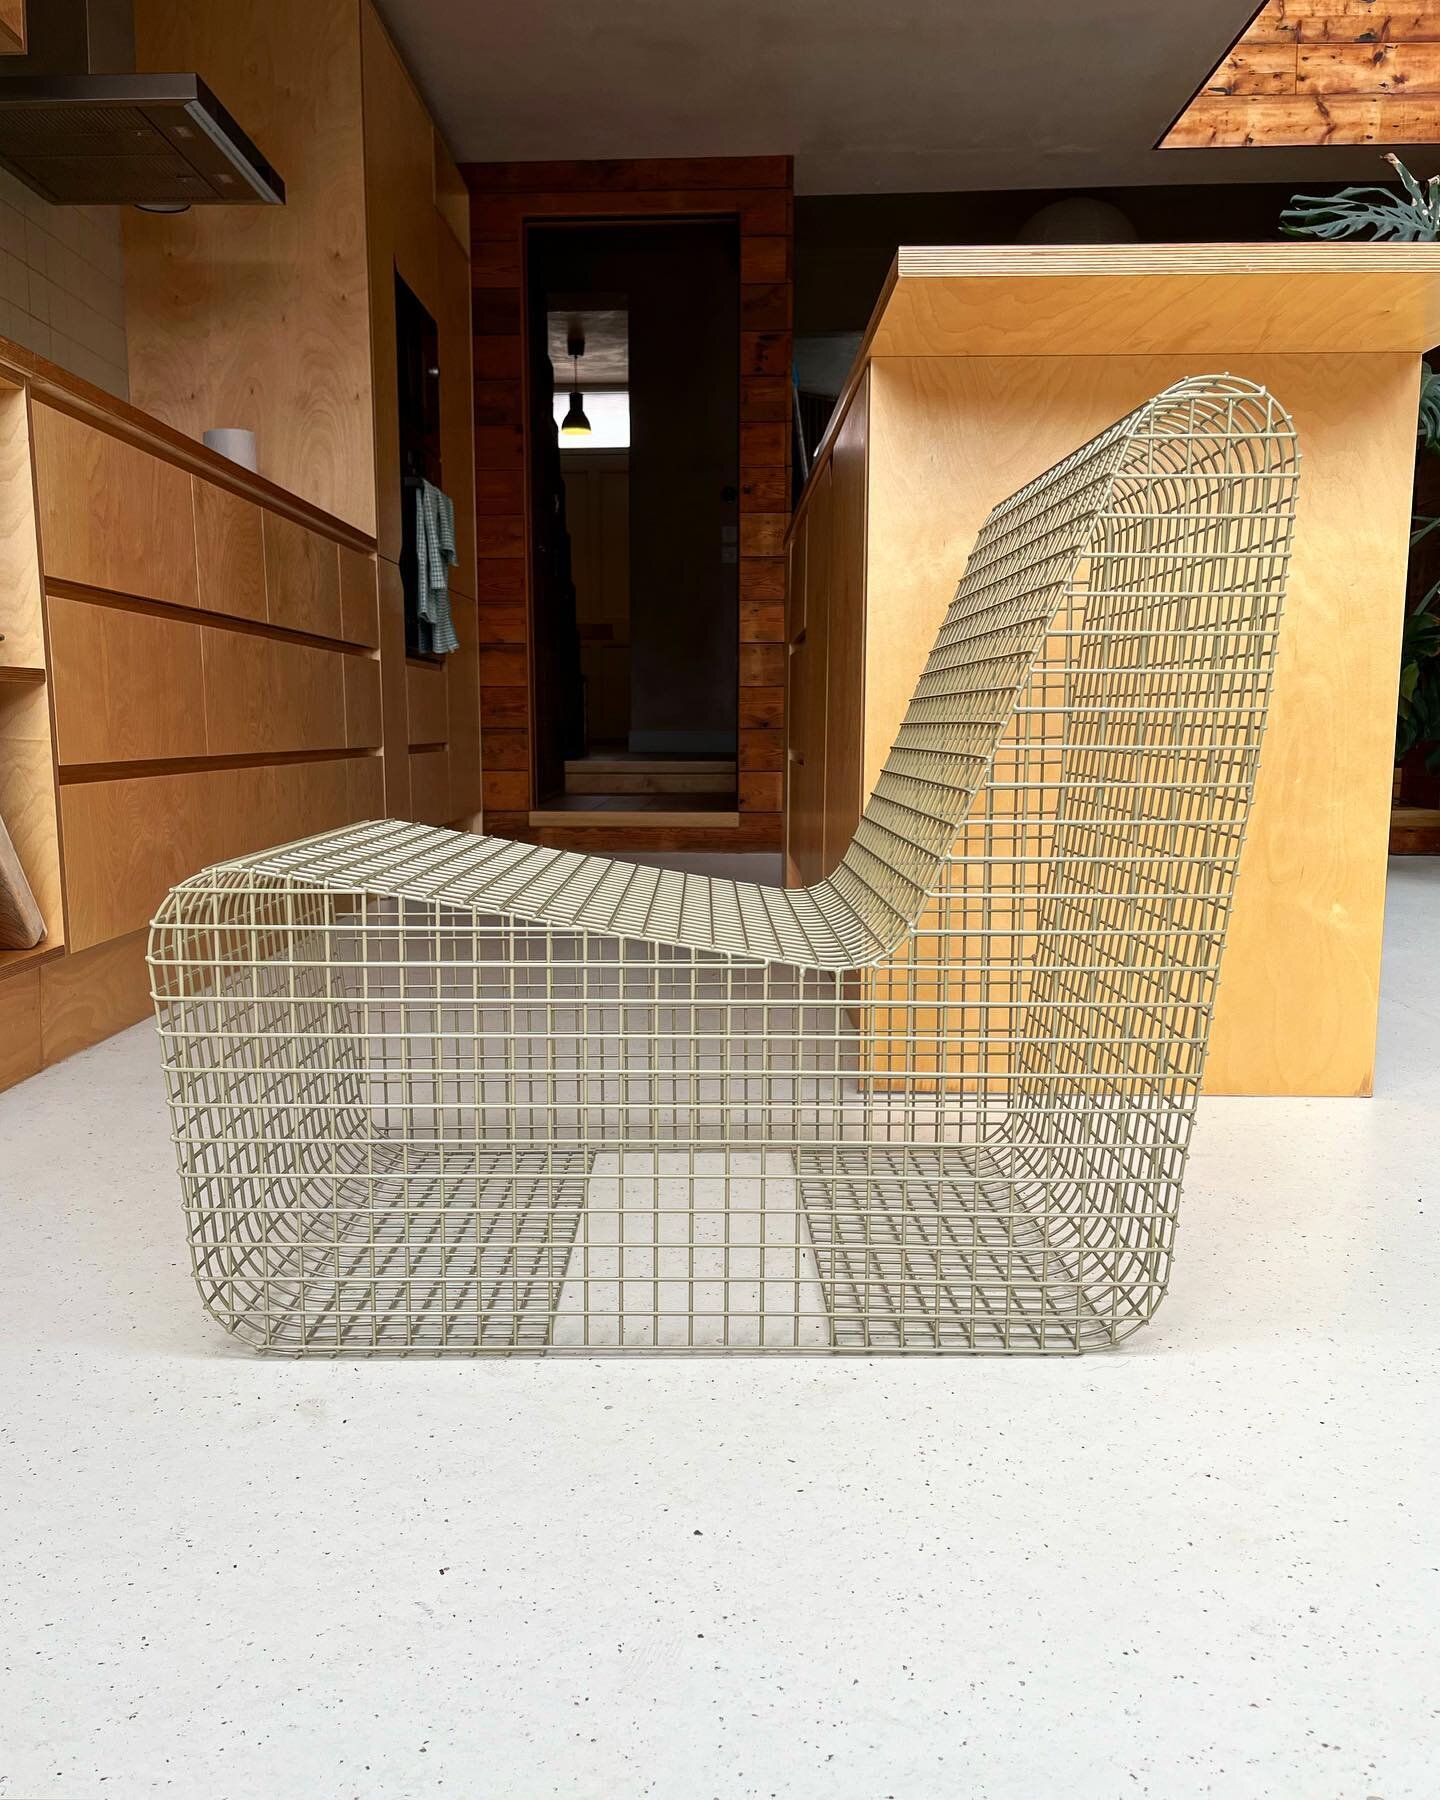 Gabion II Chair delivered (by bike) yesterday. Planning a pair of these in stainless steel soon #️⃣